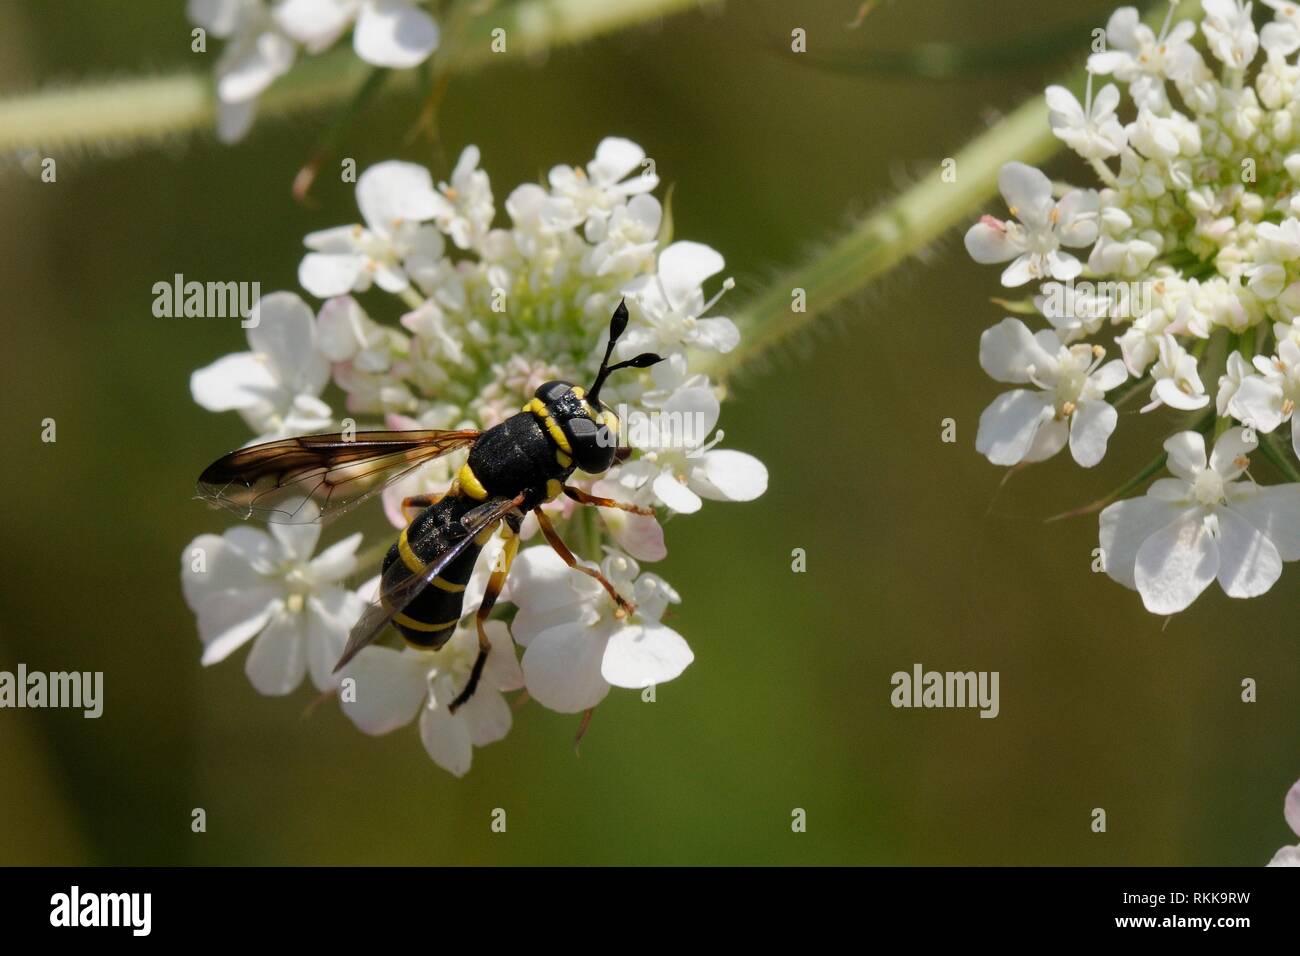 Female wasp-mimicking Hoverfly (Ceriana vespiformis) feeding from Wild carrot / Queen Anne's lace (Daucus carota) flowers, Lesbos / Lesvos, Greece, Ma Stock Photo